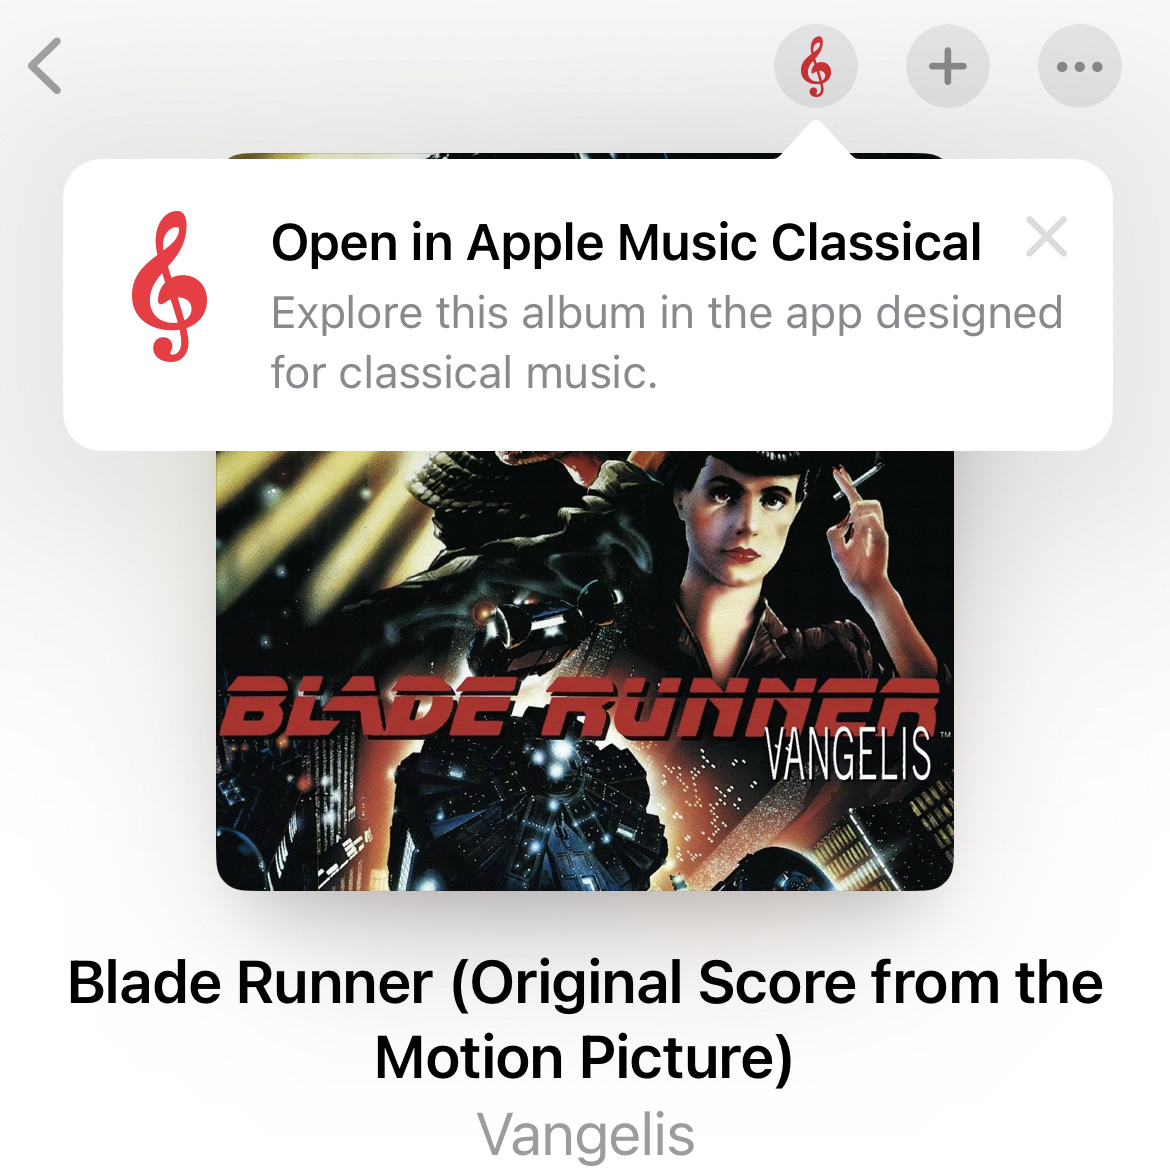 A cropped screenshot of the Apple Music app on iPhone showing the soundtrack to the Bladerunner soundtrack, with a popover inviting the user to open the album in Apple Music Classical.